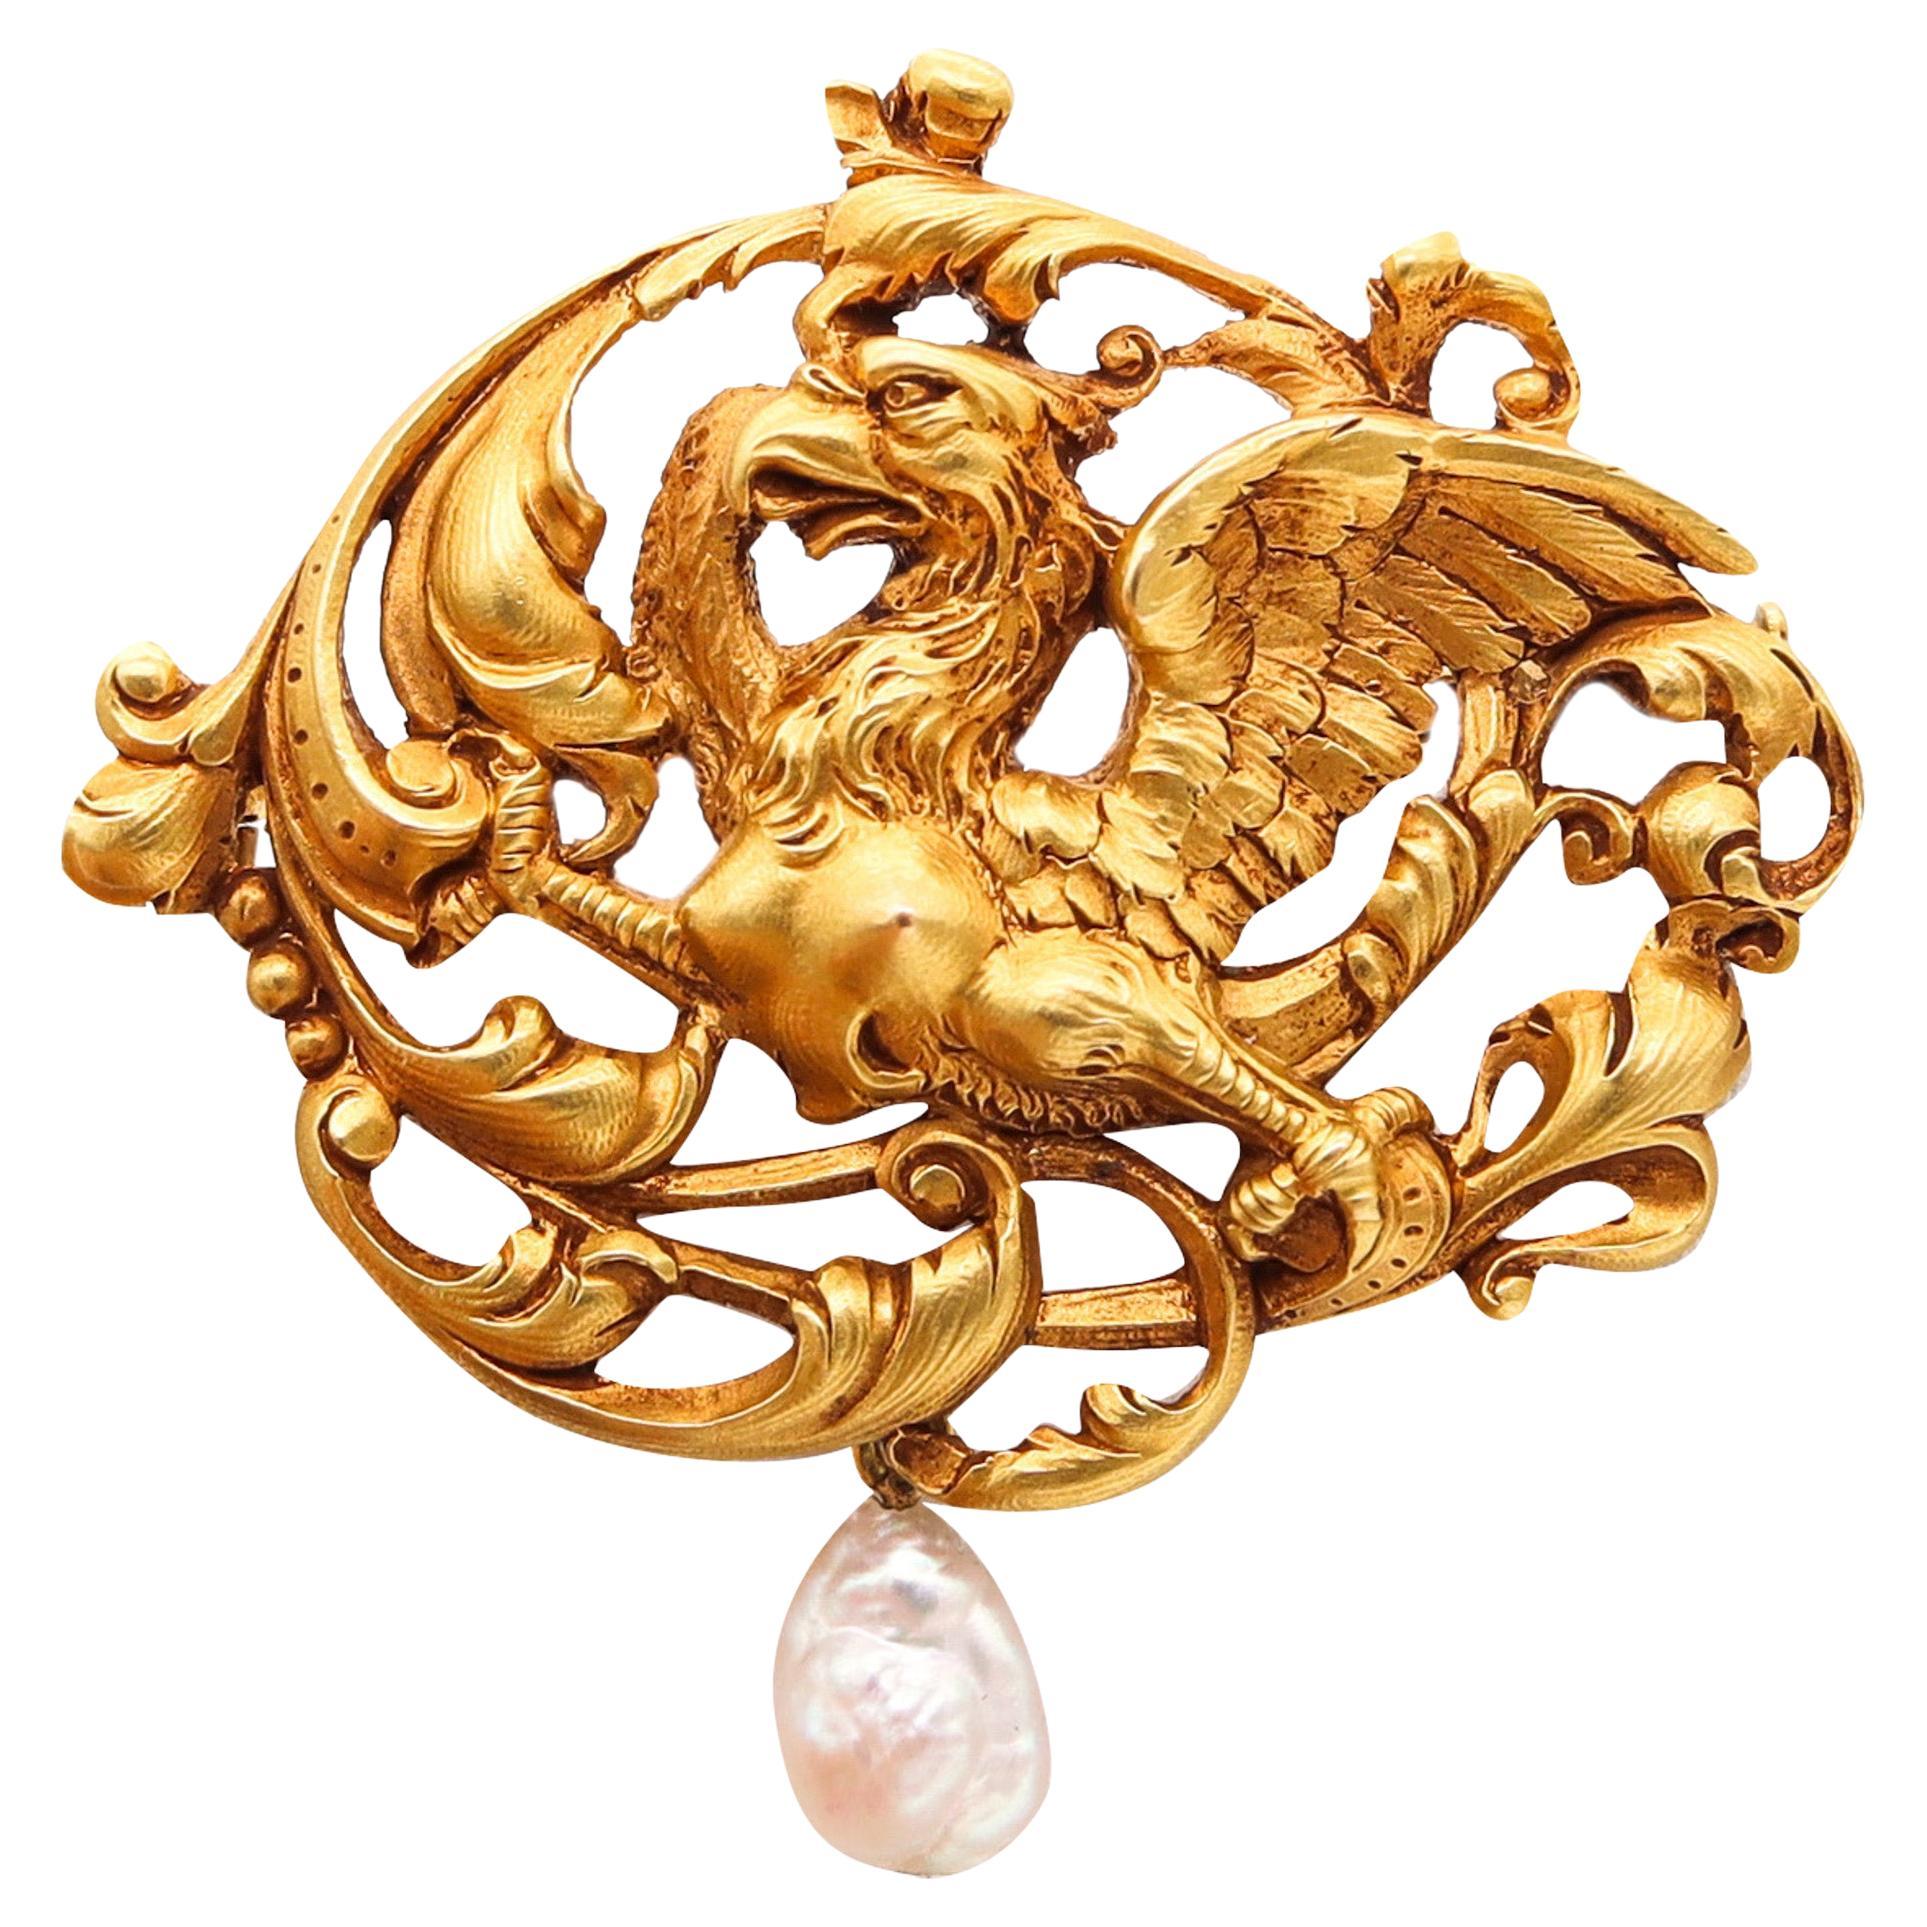 Gaston Lafitte 1890 French Art Nouveau Griffin Brooch in 18kt Gold with Pearl For Sale